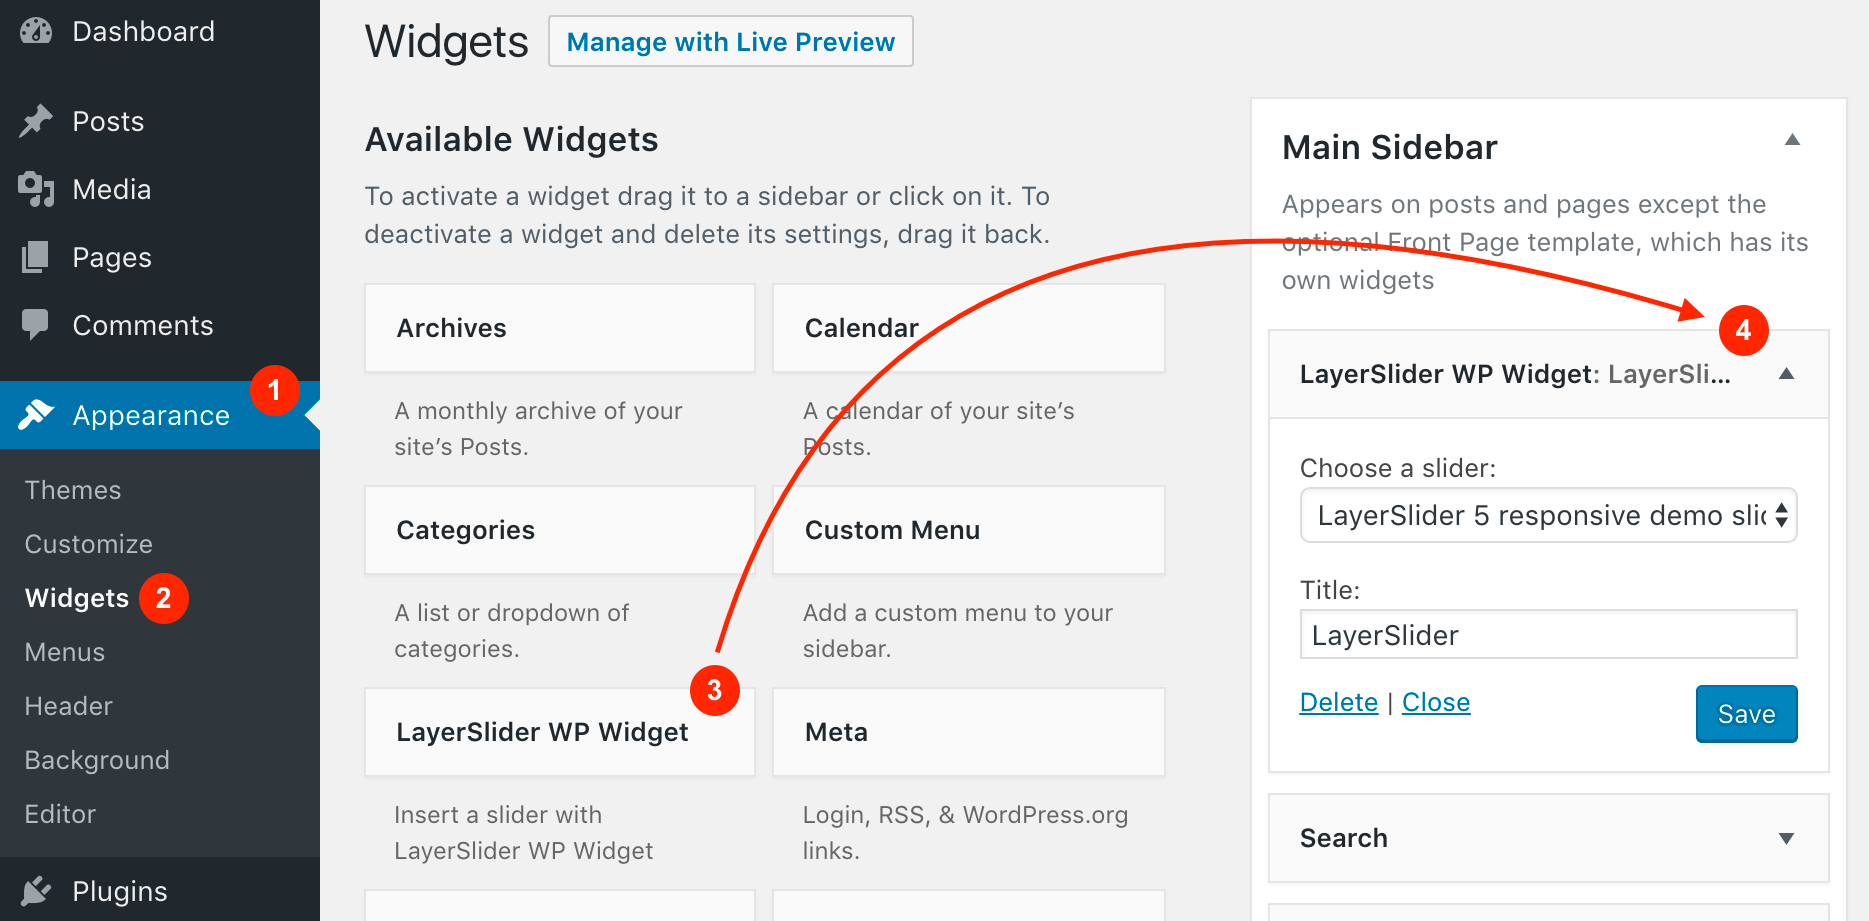 Inserting a slider with the LayerSlider WP Widget